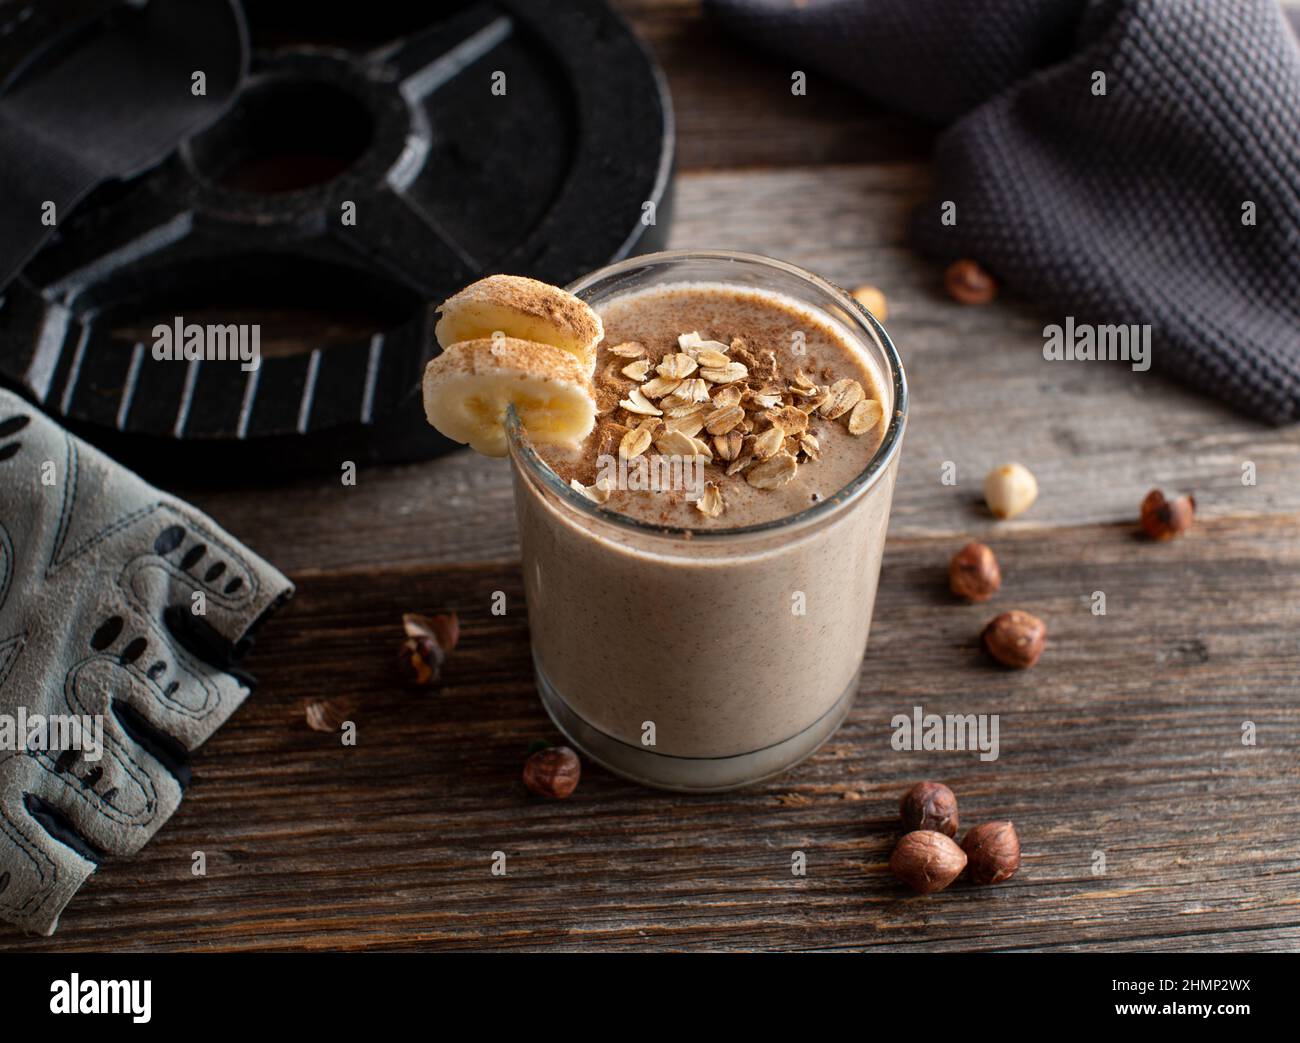 Body building snack for muscle gain. Pre workout shake with chocolate whey protein, oat flakes, bananas and hazelnuts Stock Photo